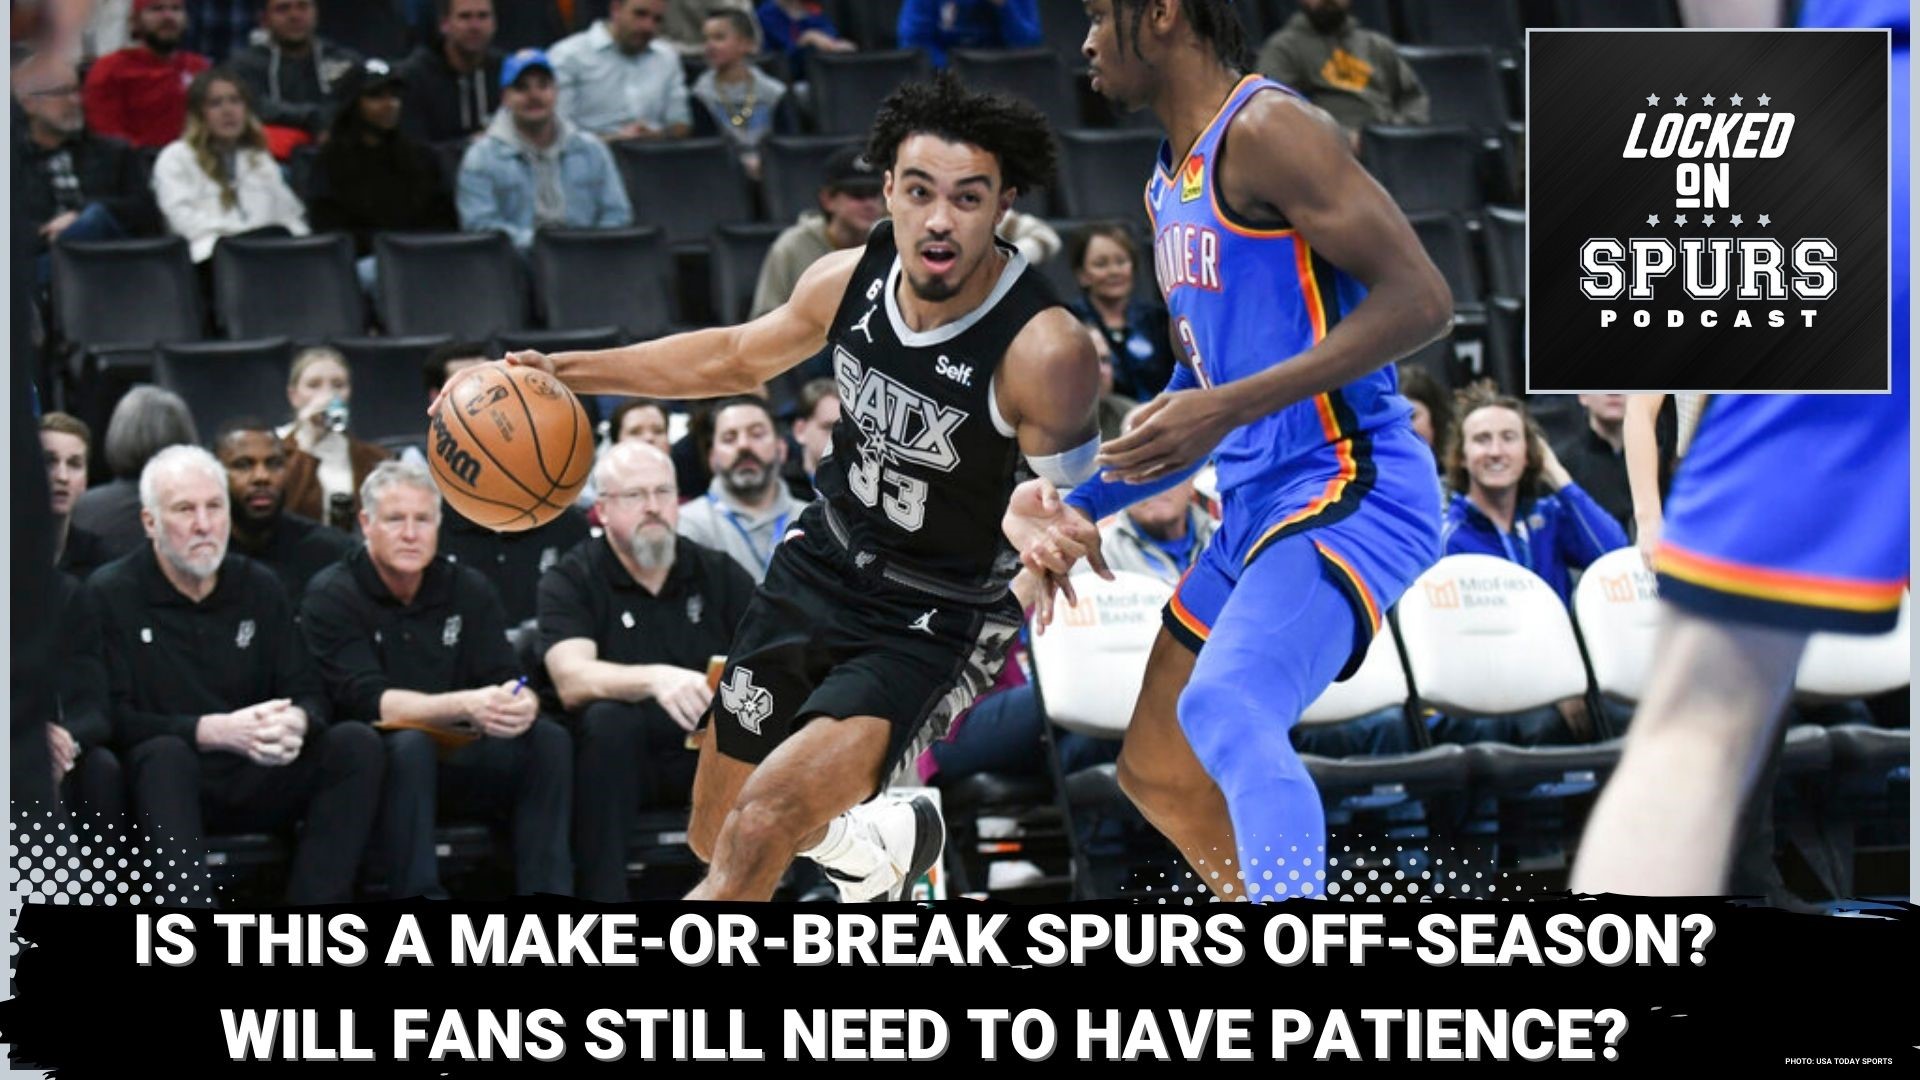 How key is this off-season for the Spurs' rebuild?